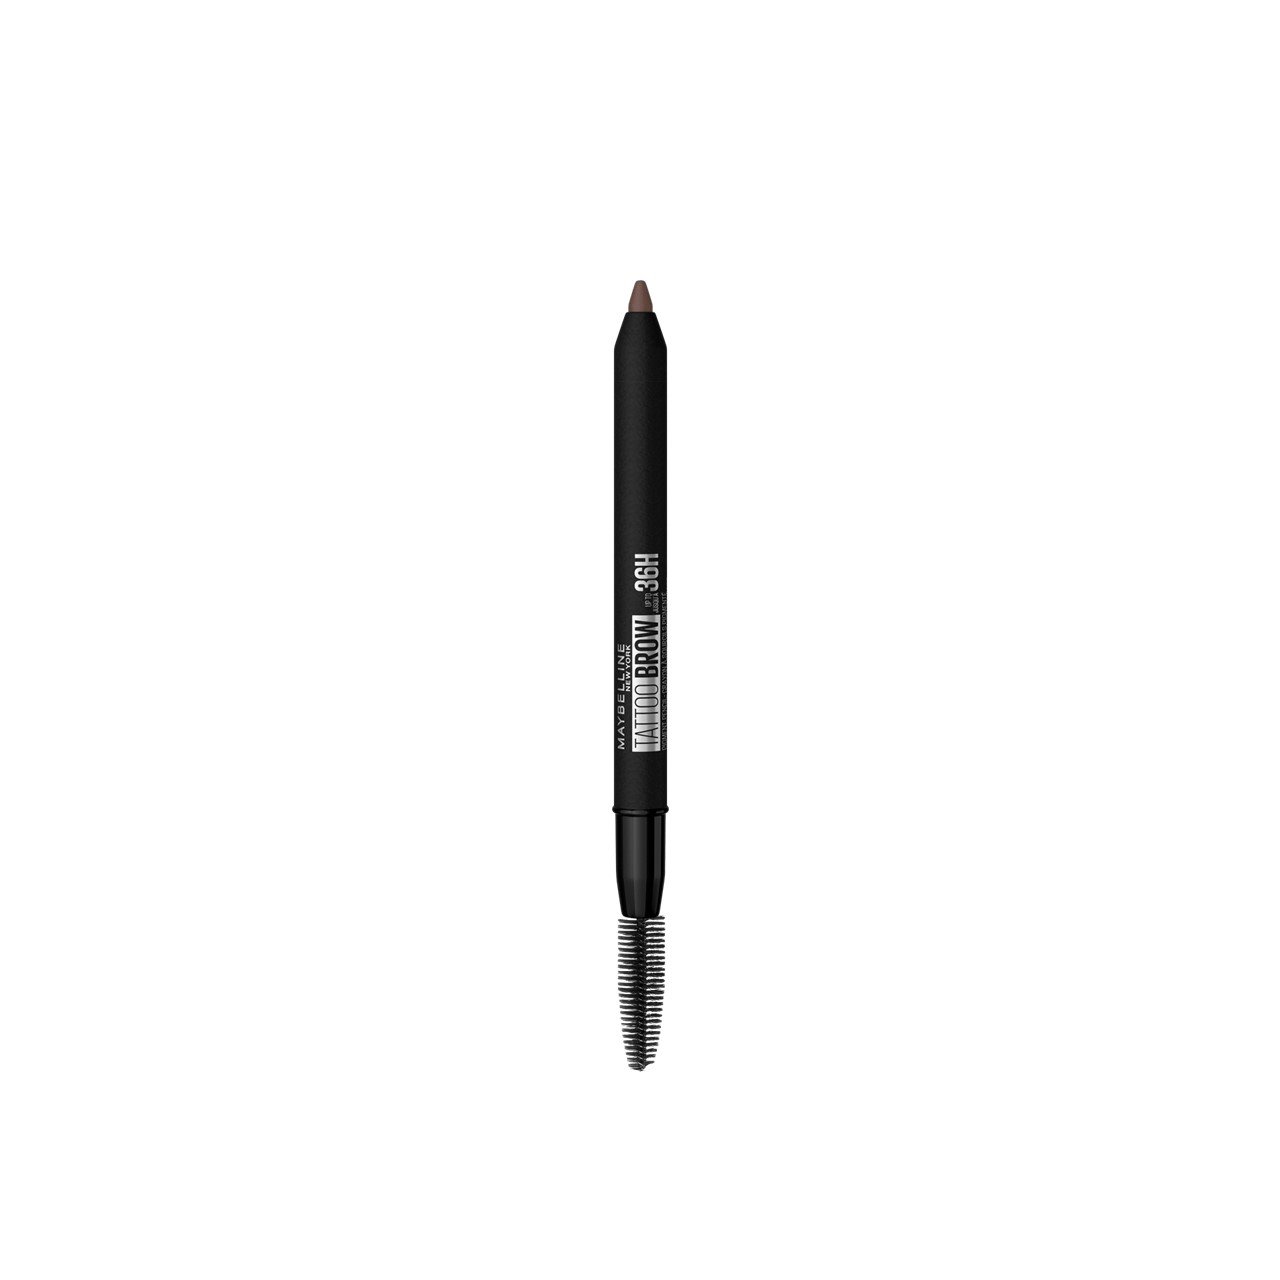 https://static.beautytocare.com/media/catalog/product/m/a/maybelline-tattoo-brow-36h-eyebrow-pencil-07-deep-brown-0-73g_1.jpg